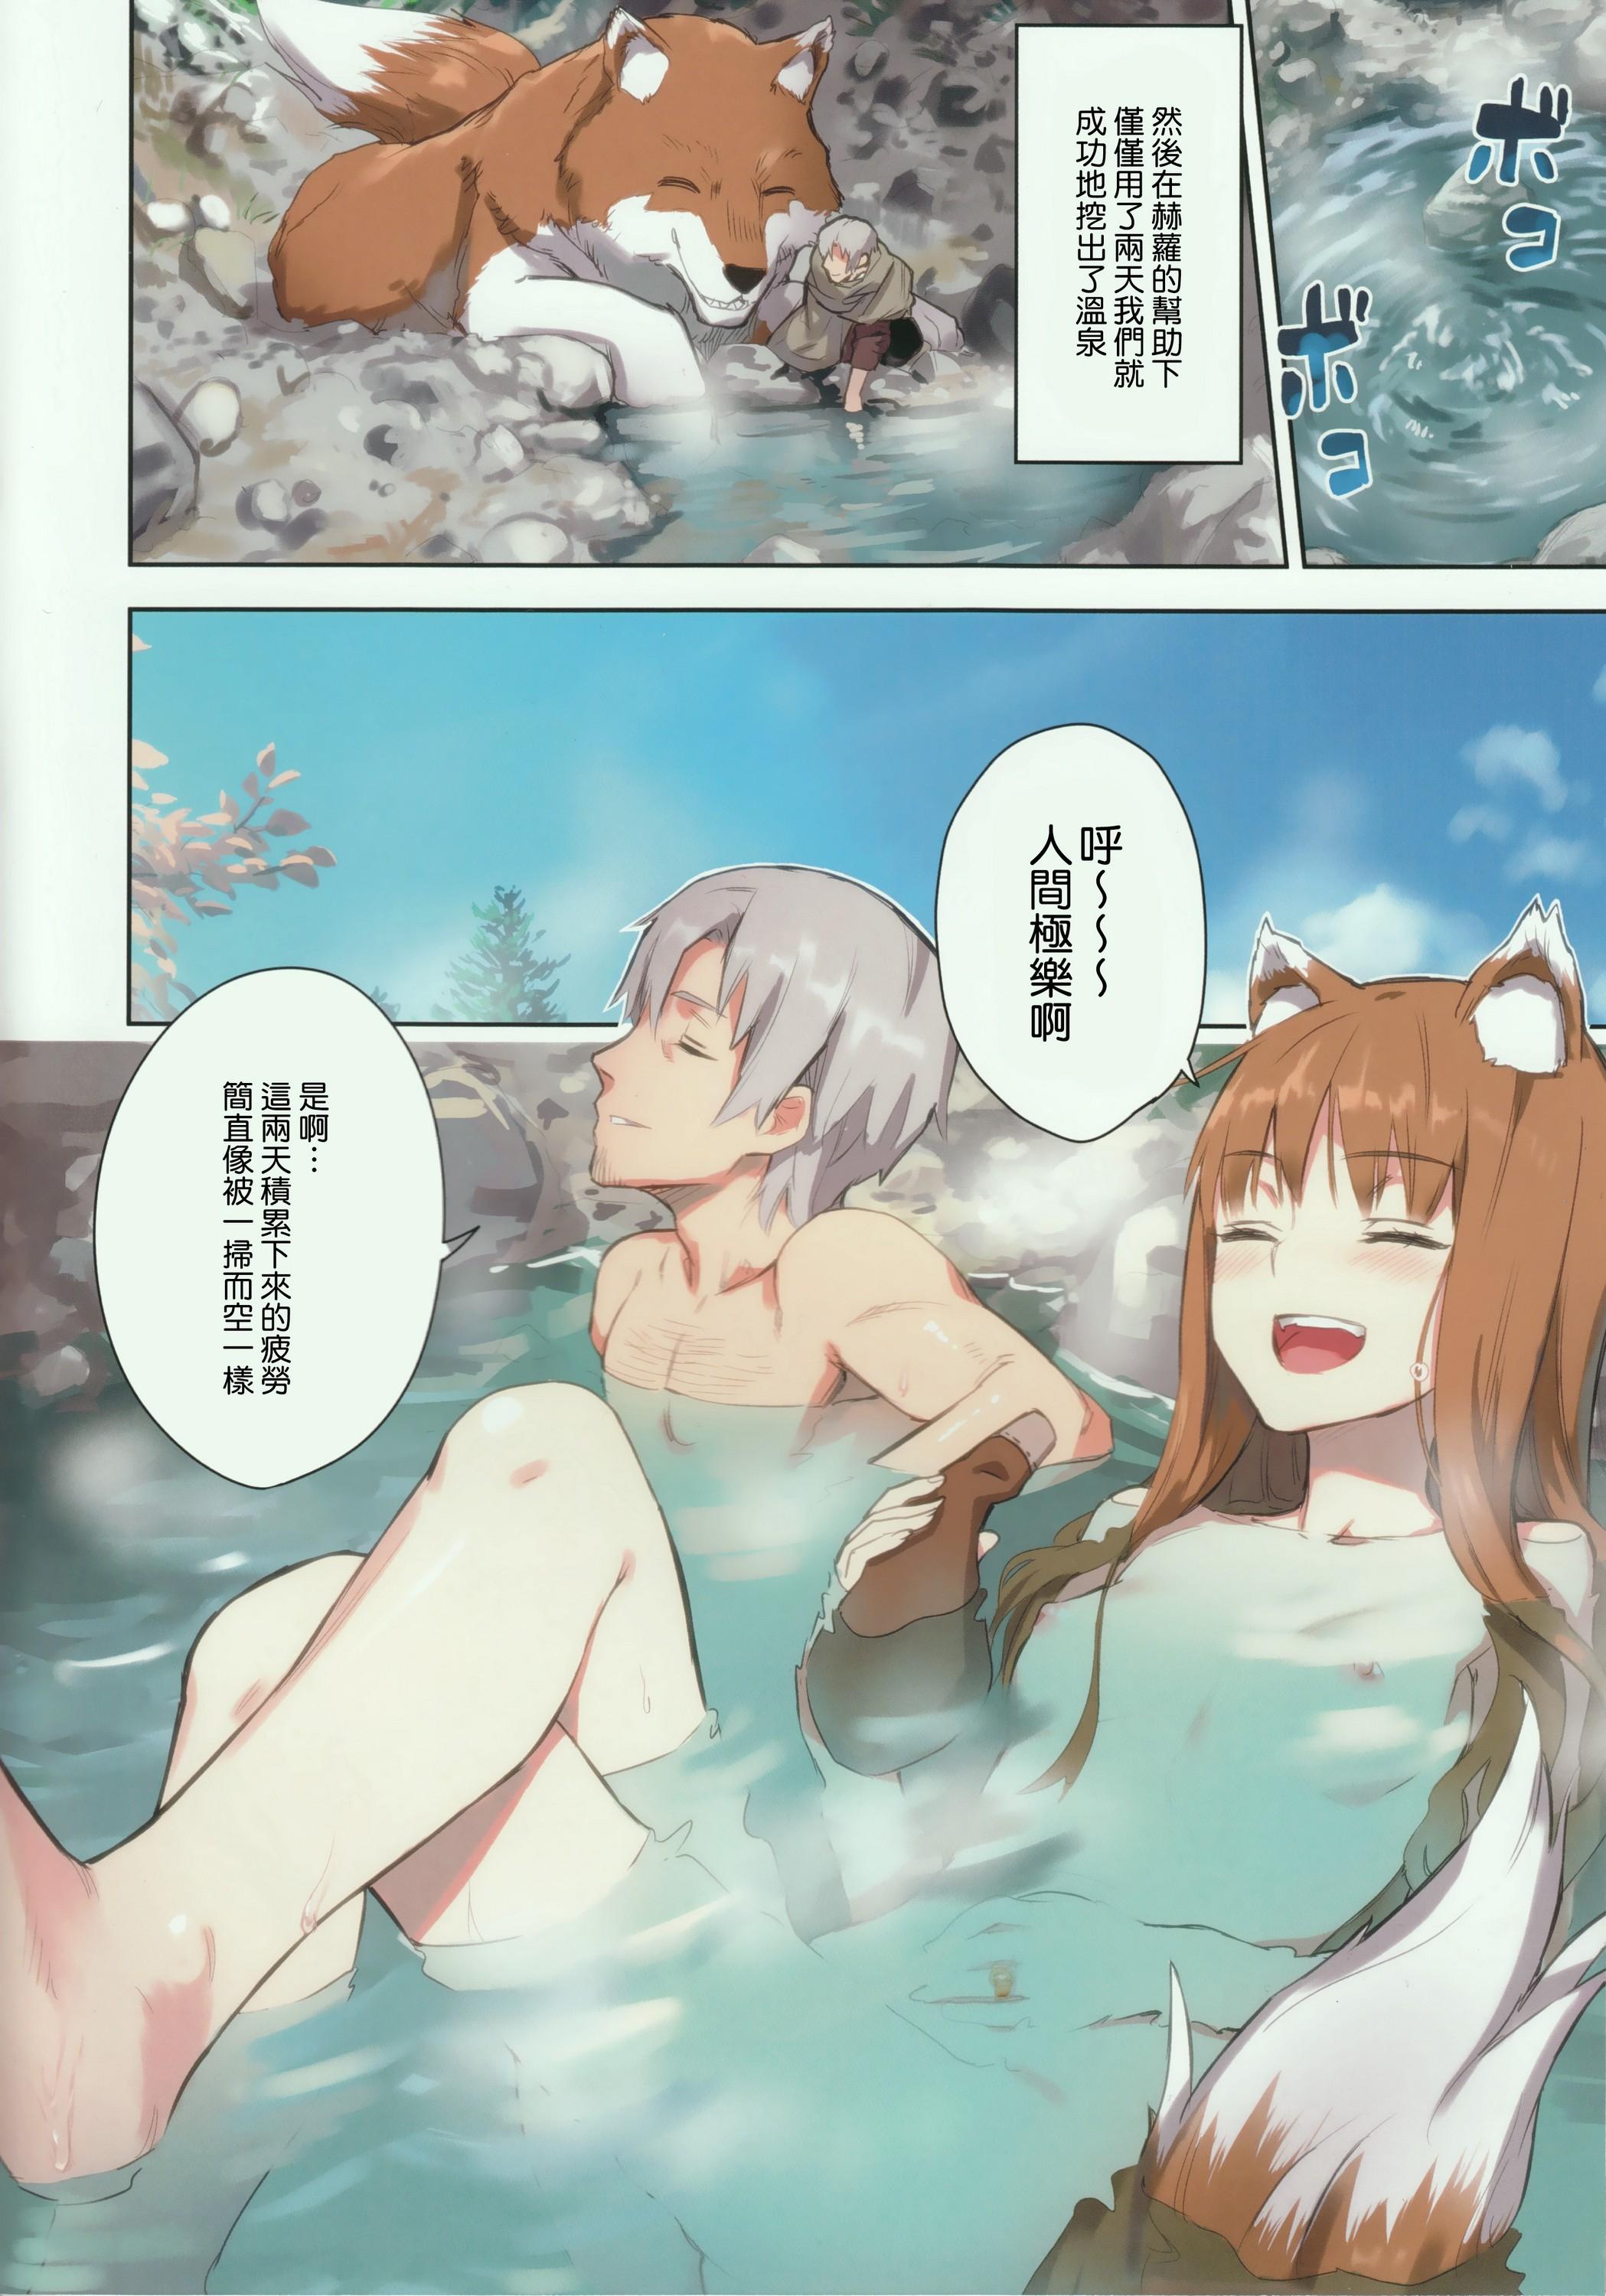 Stepsiblings Wacchi to Nyohhira Bon FULL COLOR - Spice and wolf Lezbi - Page 8